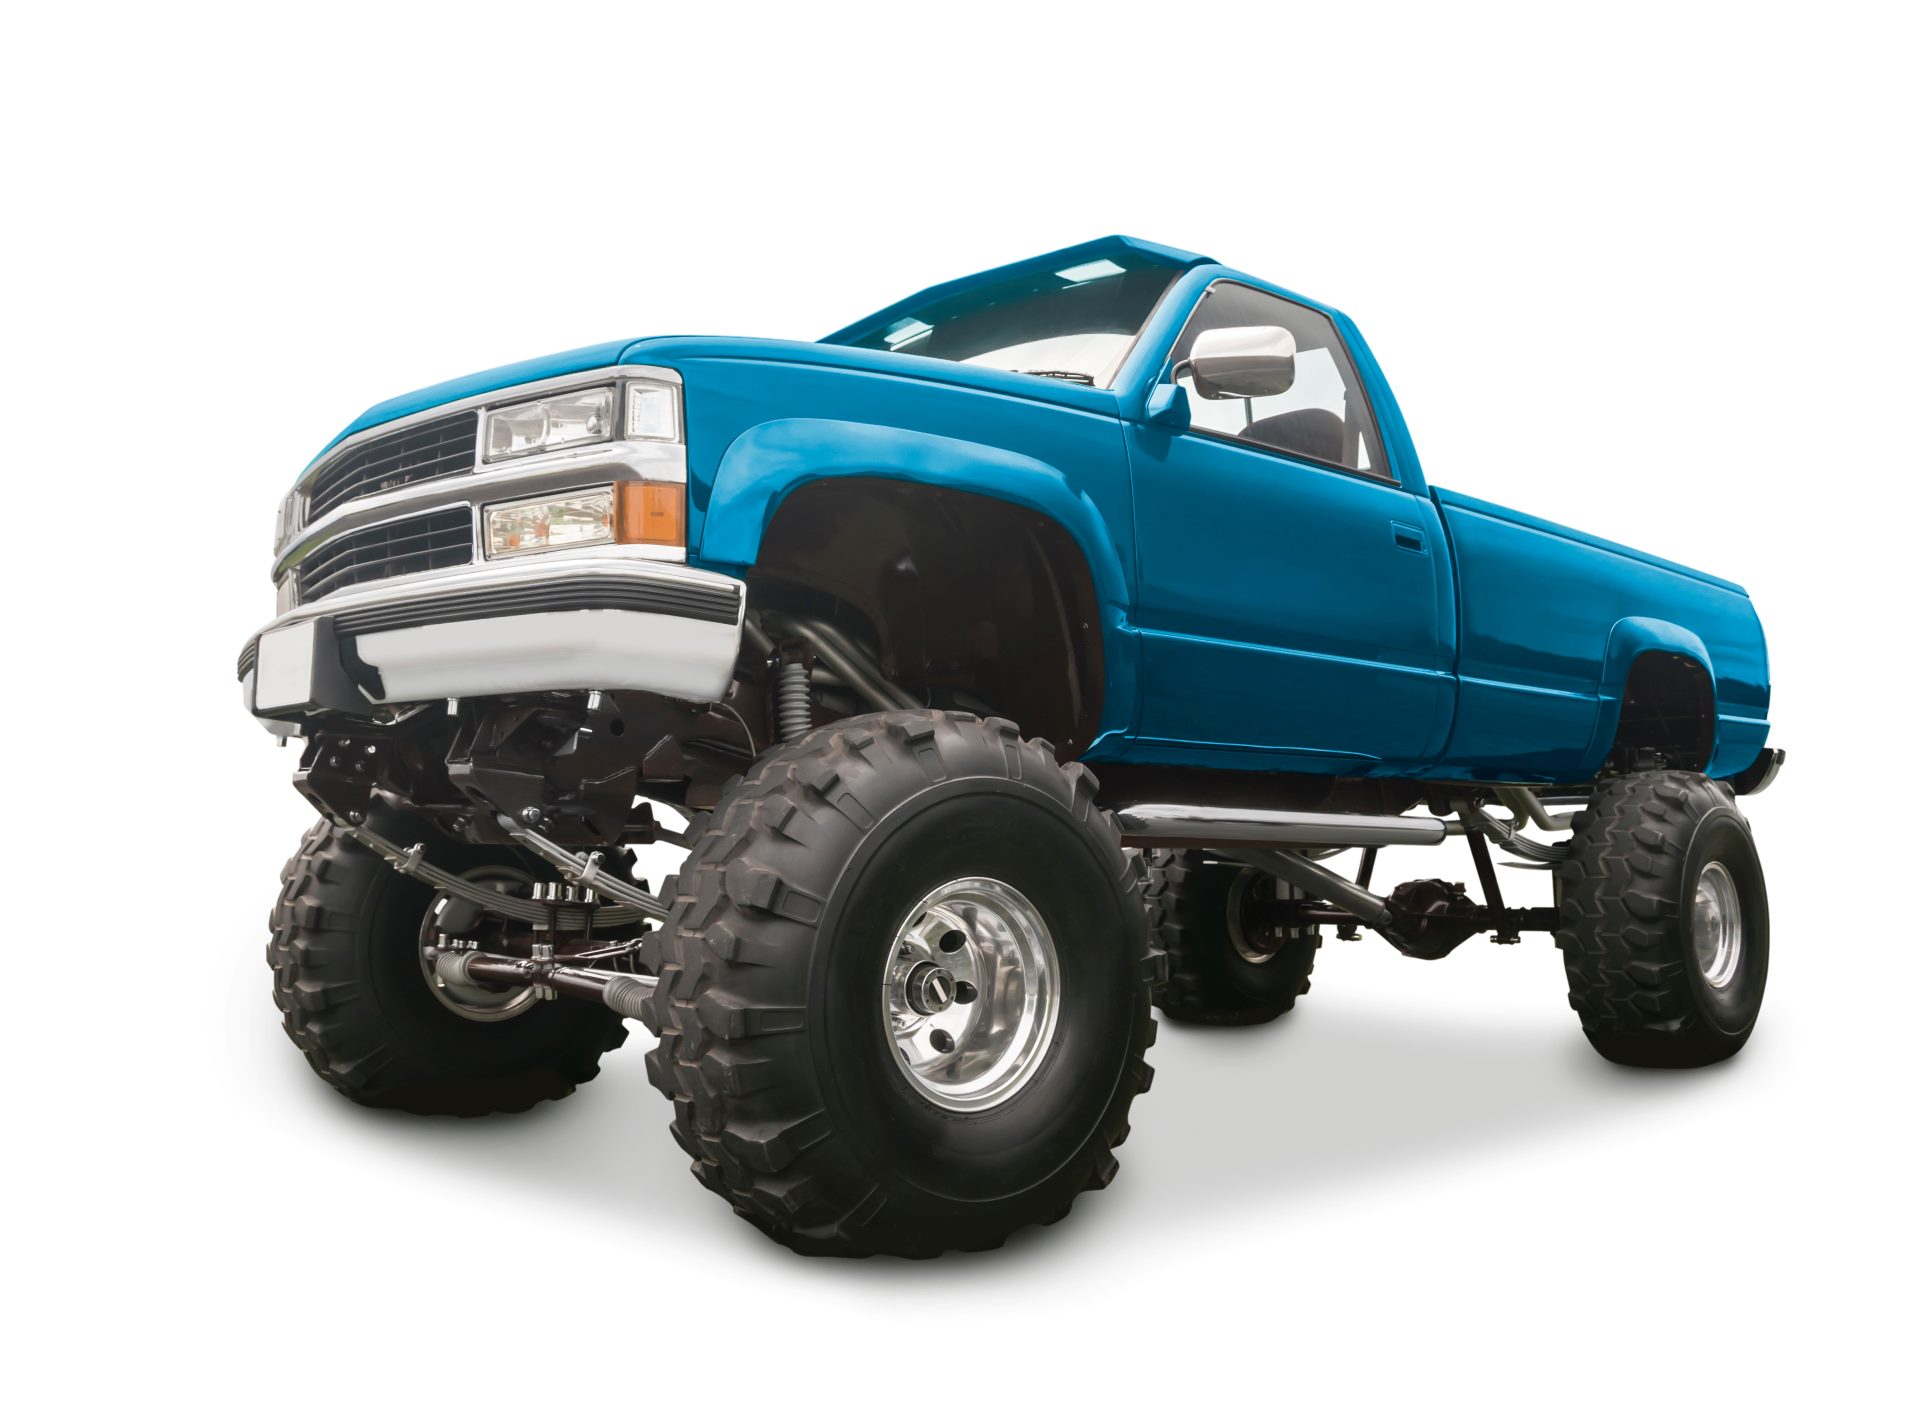 conceptual image of a blue North American truck with a step-bar featuring a high lift kit accommodating large off-road tires